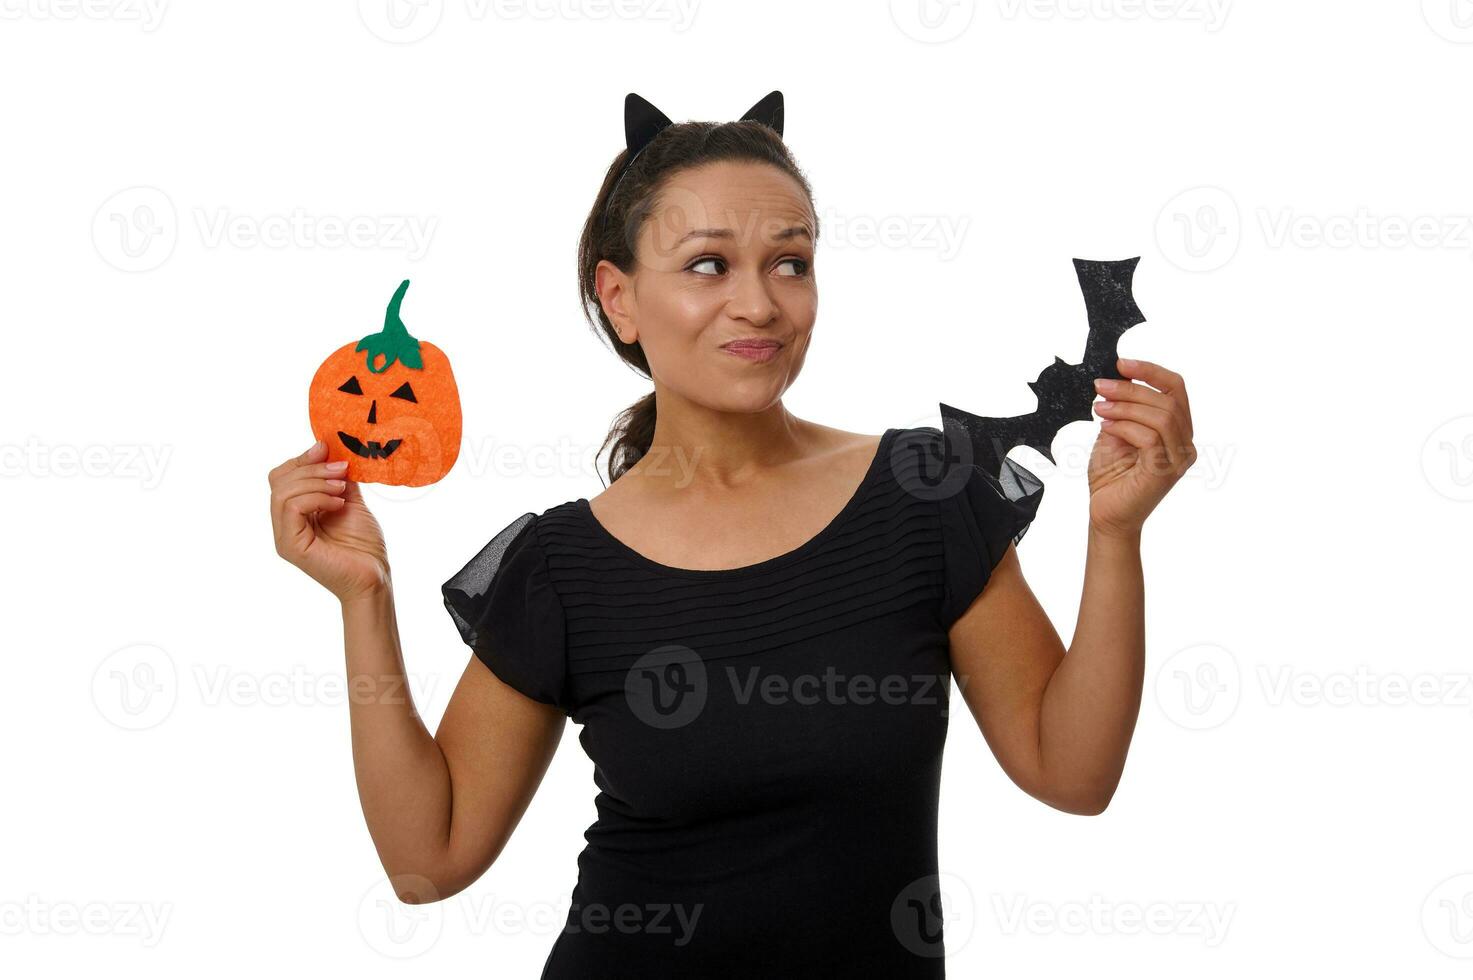 Surprised mysterious smiling Hispanic woman in hoop with cat ears, dressed in black, holds orange handmade felt-cut pumpkin and bat, poses against white background with copy space for Halloween ad photo